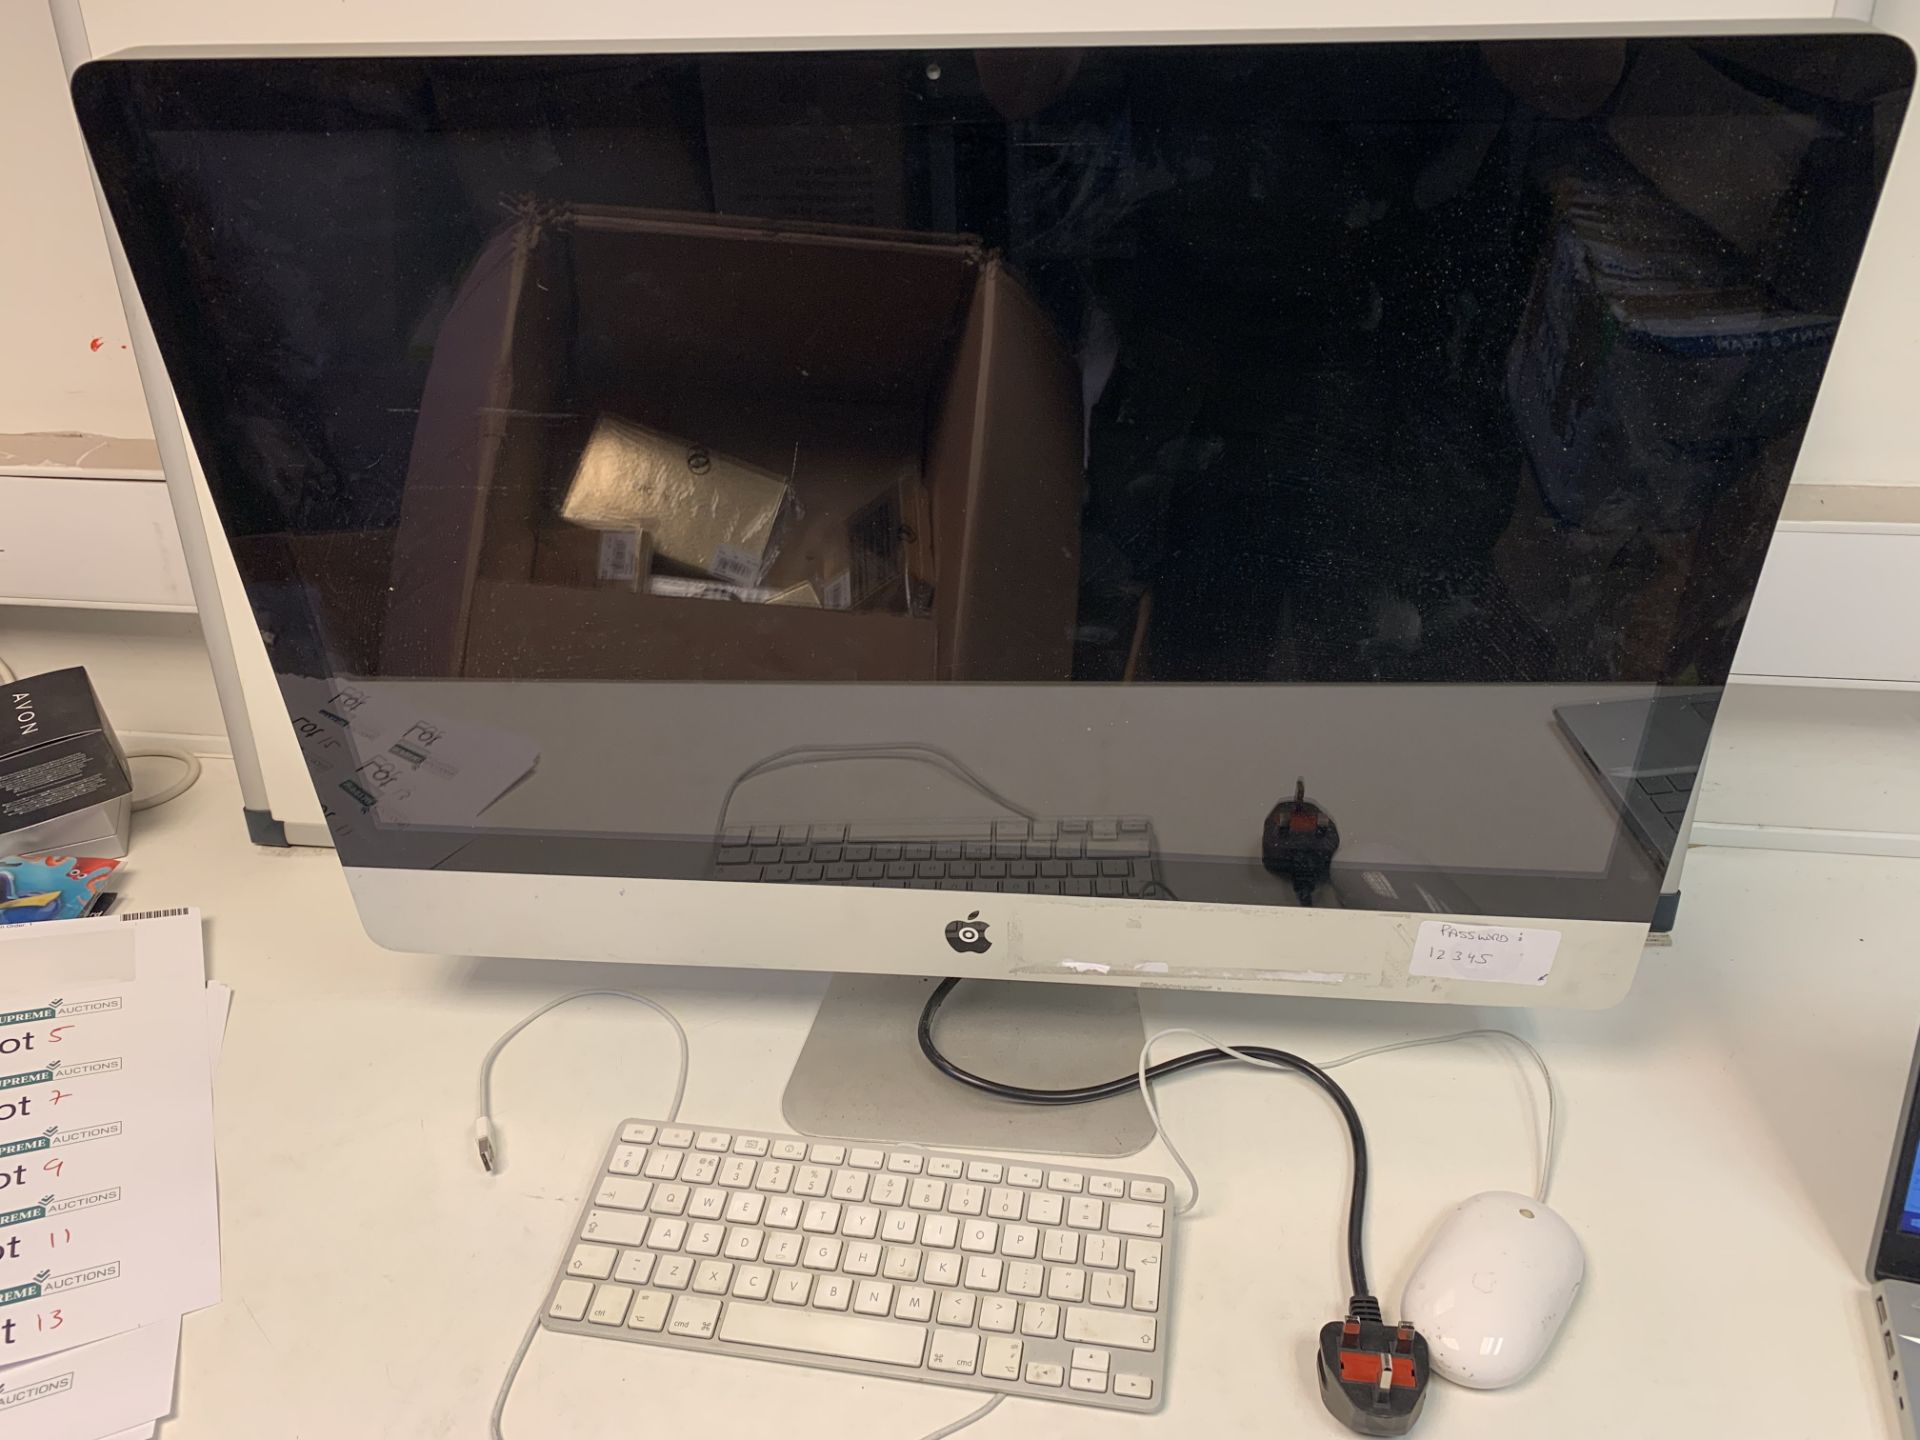 APPLE IMAC ALL IN ONE PC, INTEL CORE i5, 2.8GHZ, 27 INCH SCREEN, HIGH SIERRA OPERATING SYSTEM,